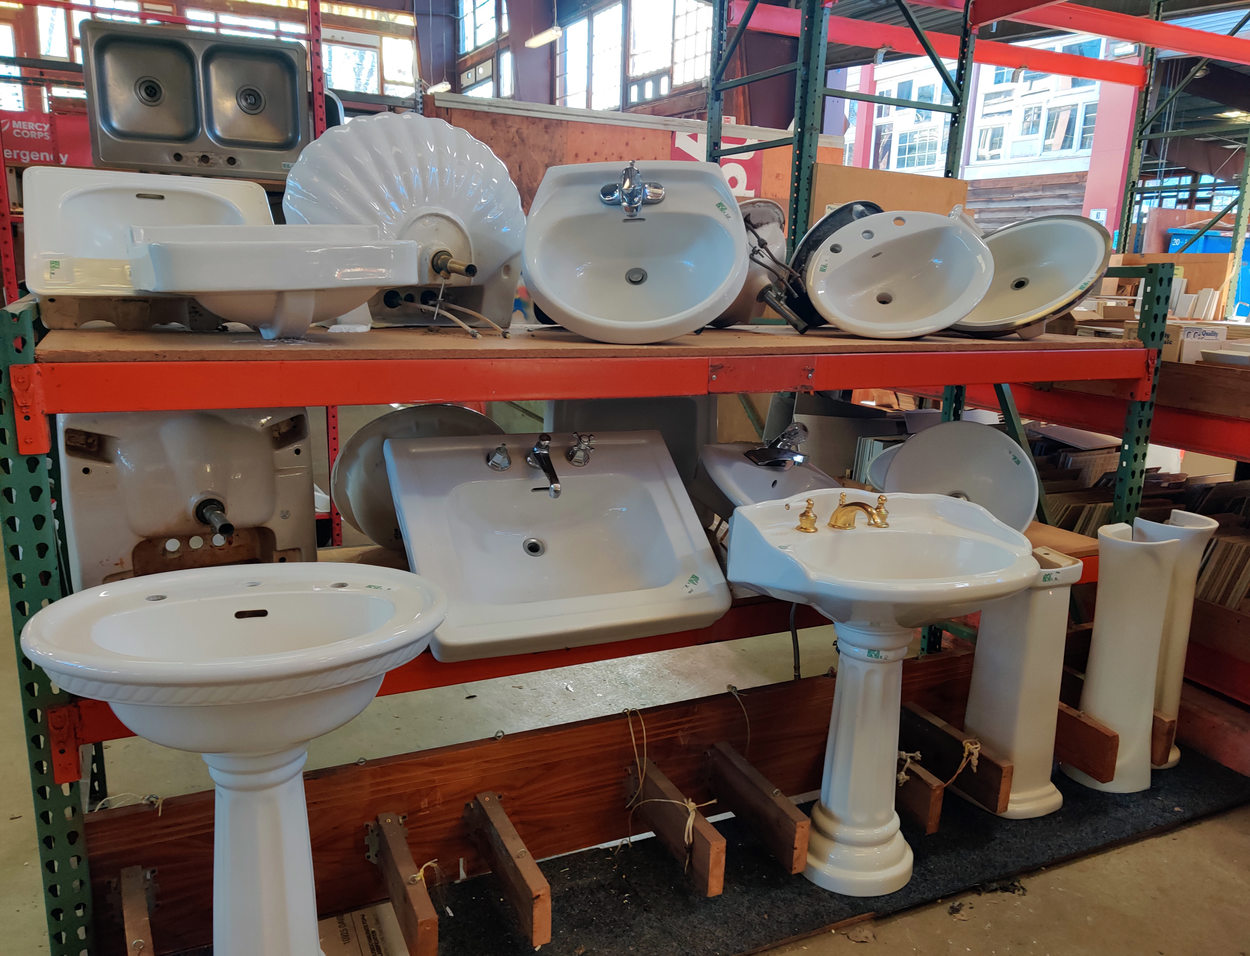 An image of sinks at the Rebuilding Center